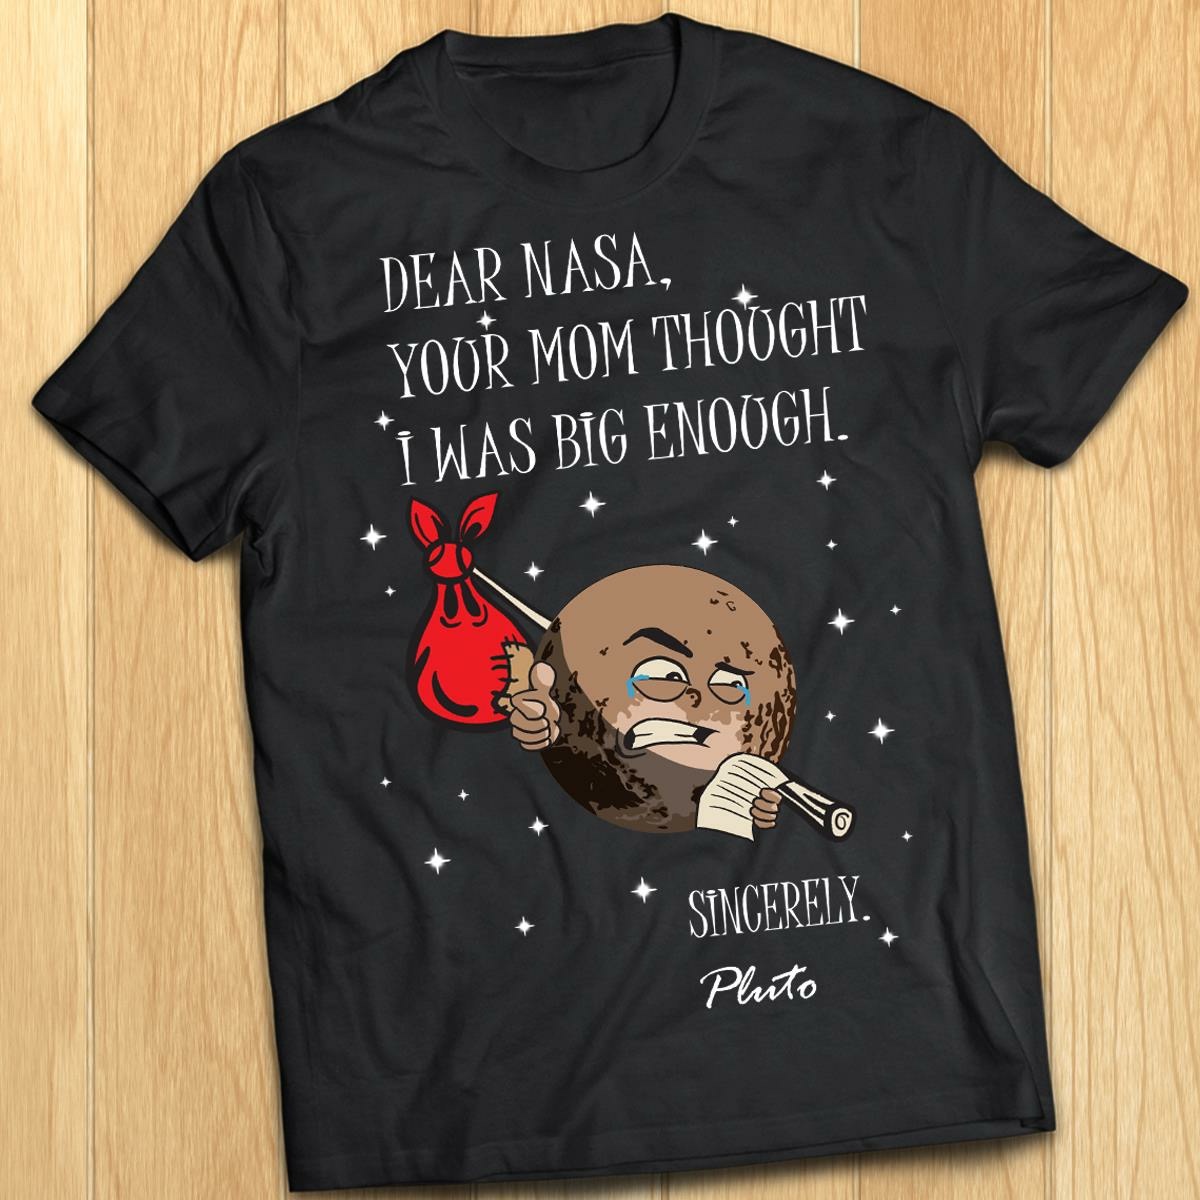 t shirt - Dear Nasa, Your Mom Thought "I Was Big Enough. Sincerely. Pluto